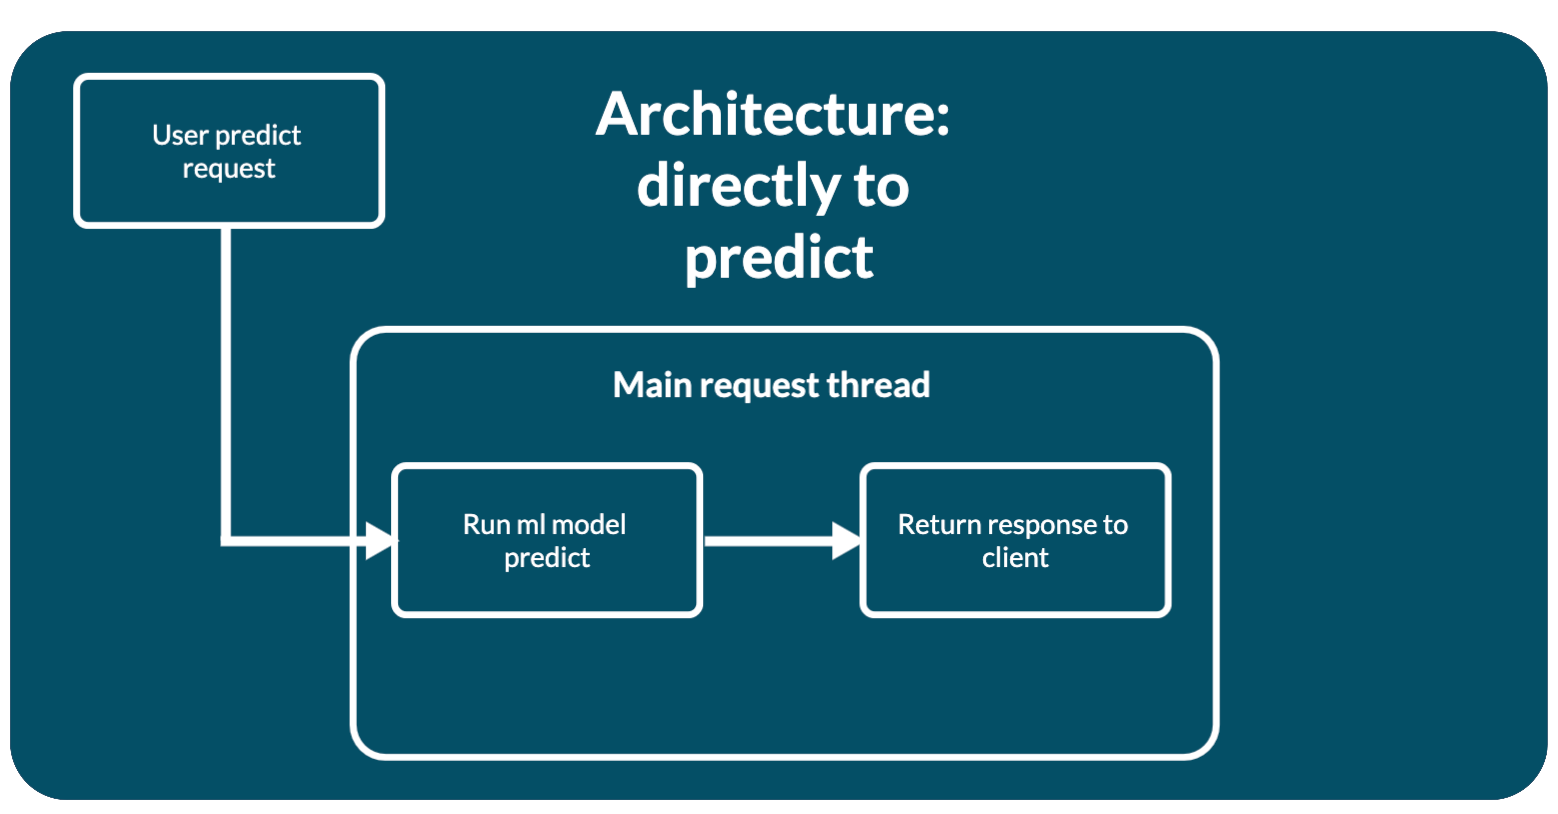 mlup architecture directly to predict